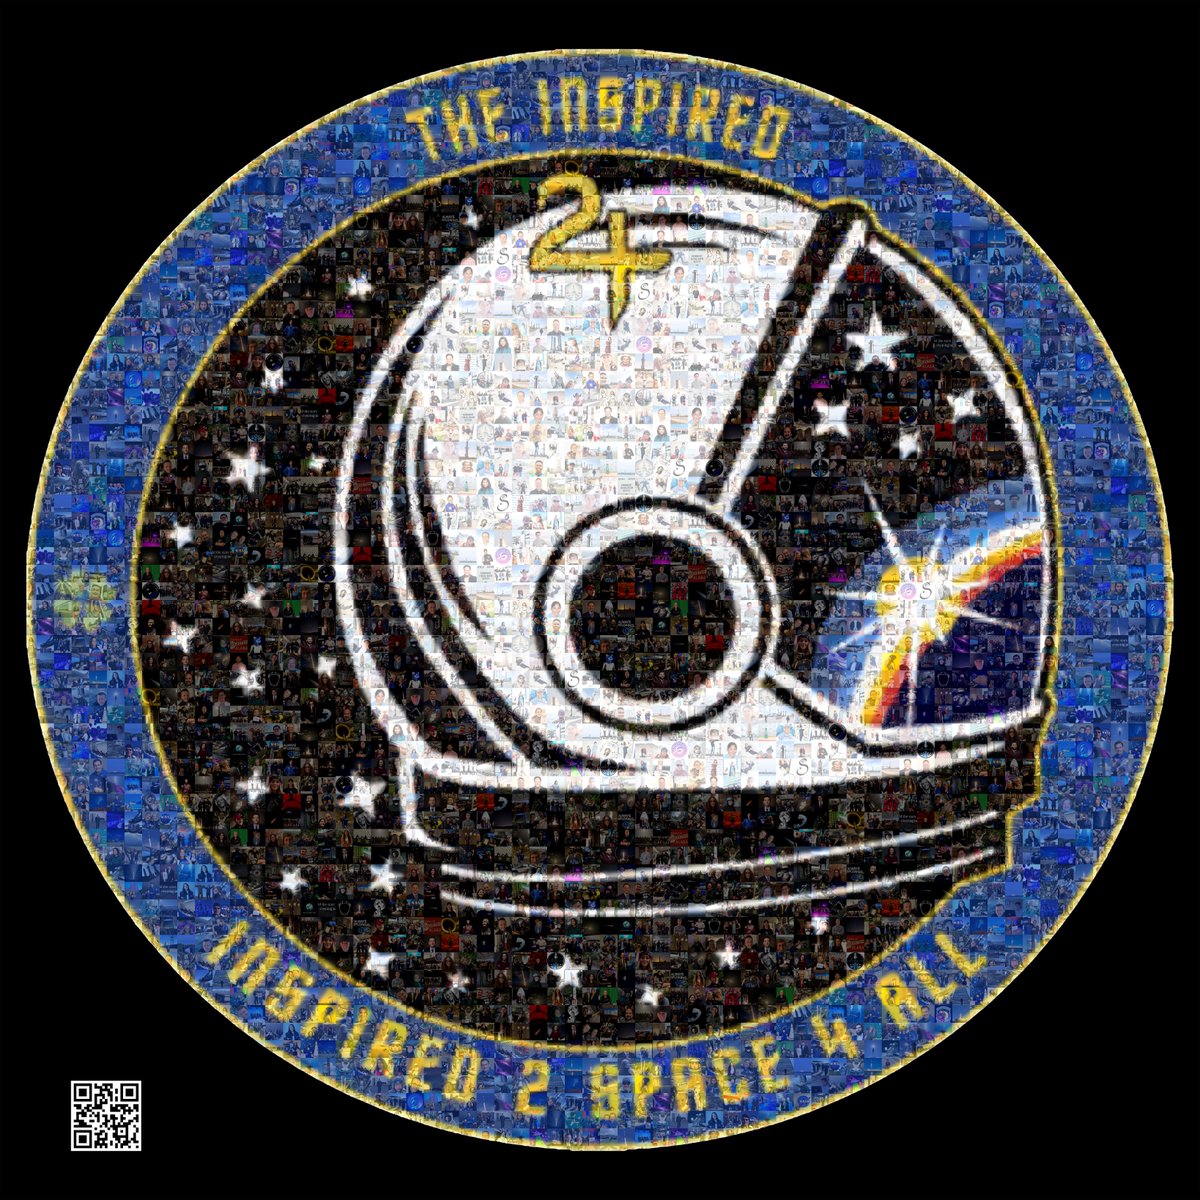 We are excited to display the new I24 Team Mosaic. It shows our team members within our single logo. We are thrilled to announce that this image will fly to the Moon aboard Fire Fly’s lunar lander, Blue Ghost, late in 2024. This is due to the generosity of @CopernicSpace 🚀🌏🌎🌍